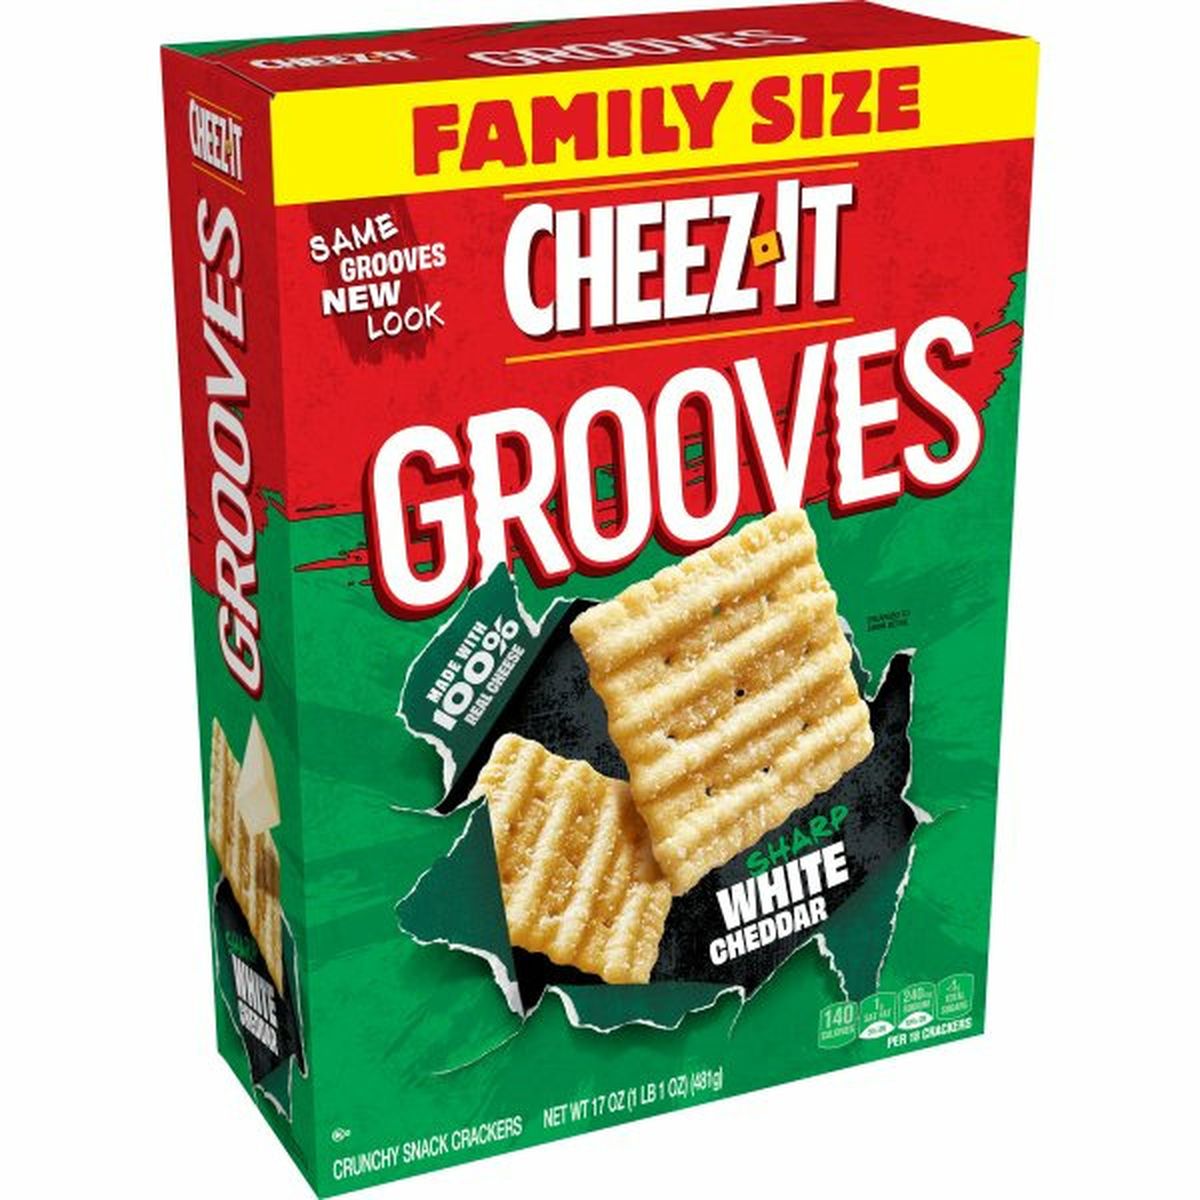 Calories in Cheez-It Crackers Cheez-It Crunchy Cheese Snack Crackers, White Cheddar, Family Size, Perfect for Snacking, 17oz